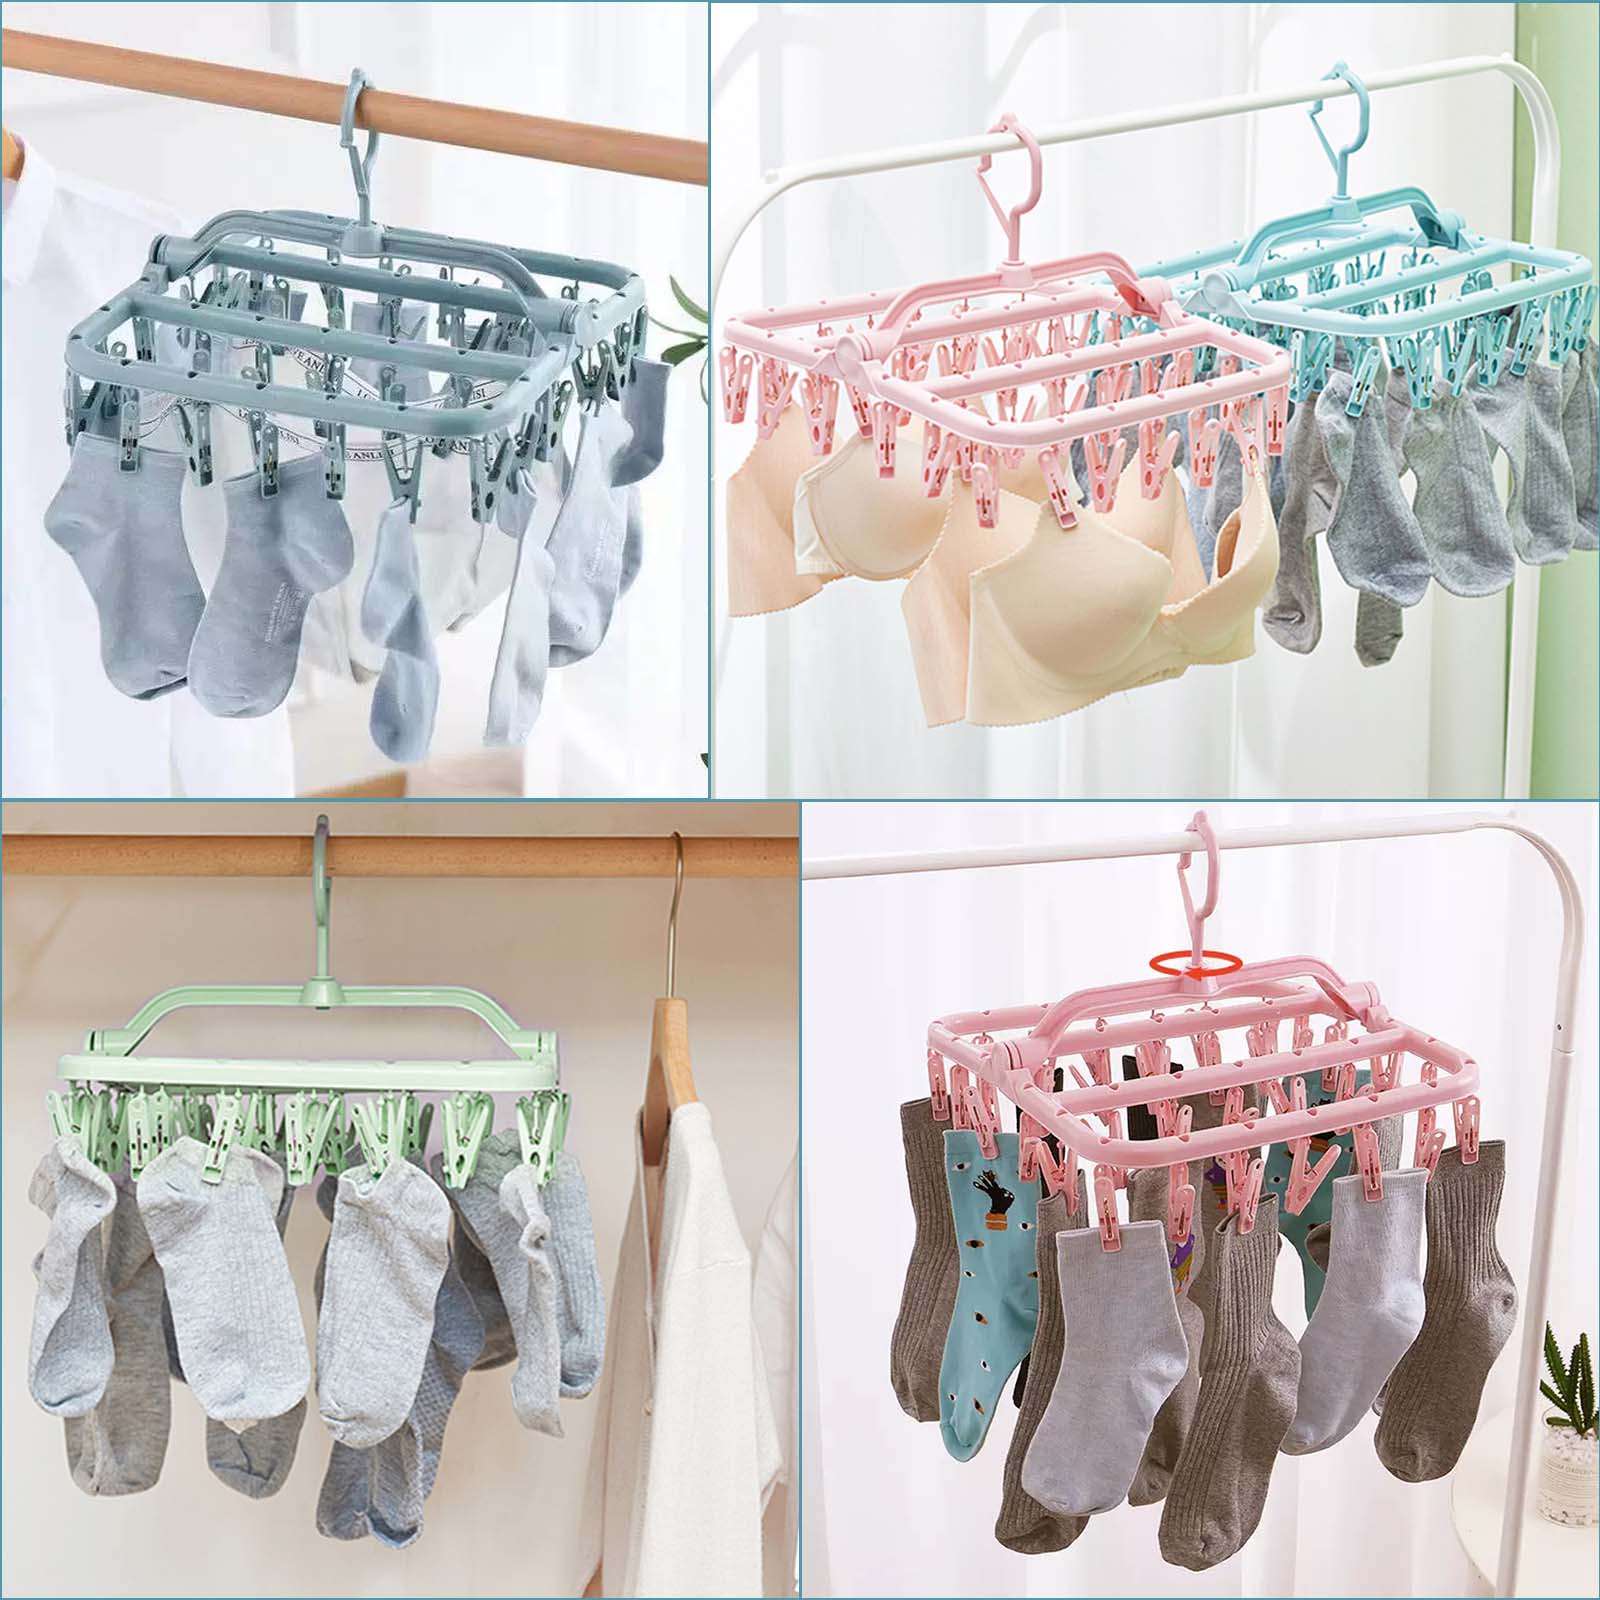 Silly Monkey Junior Kids Size Sock Blockers and Laundry Drying Hanger Rack Stainless Steel, Complete with 3 Pairs of Small Medium Large Sock